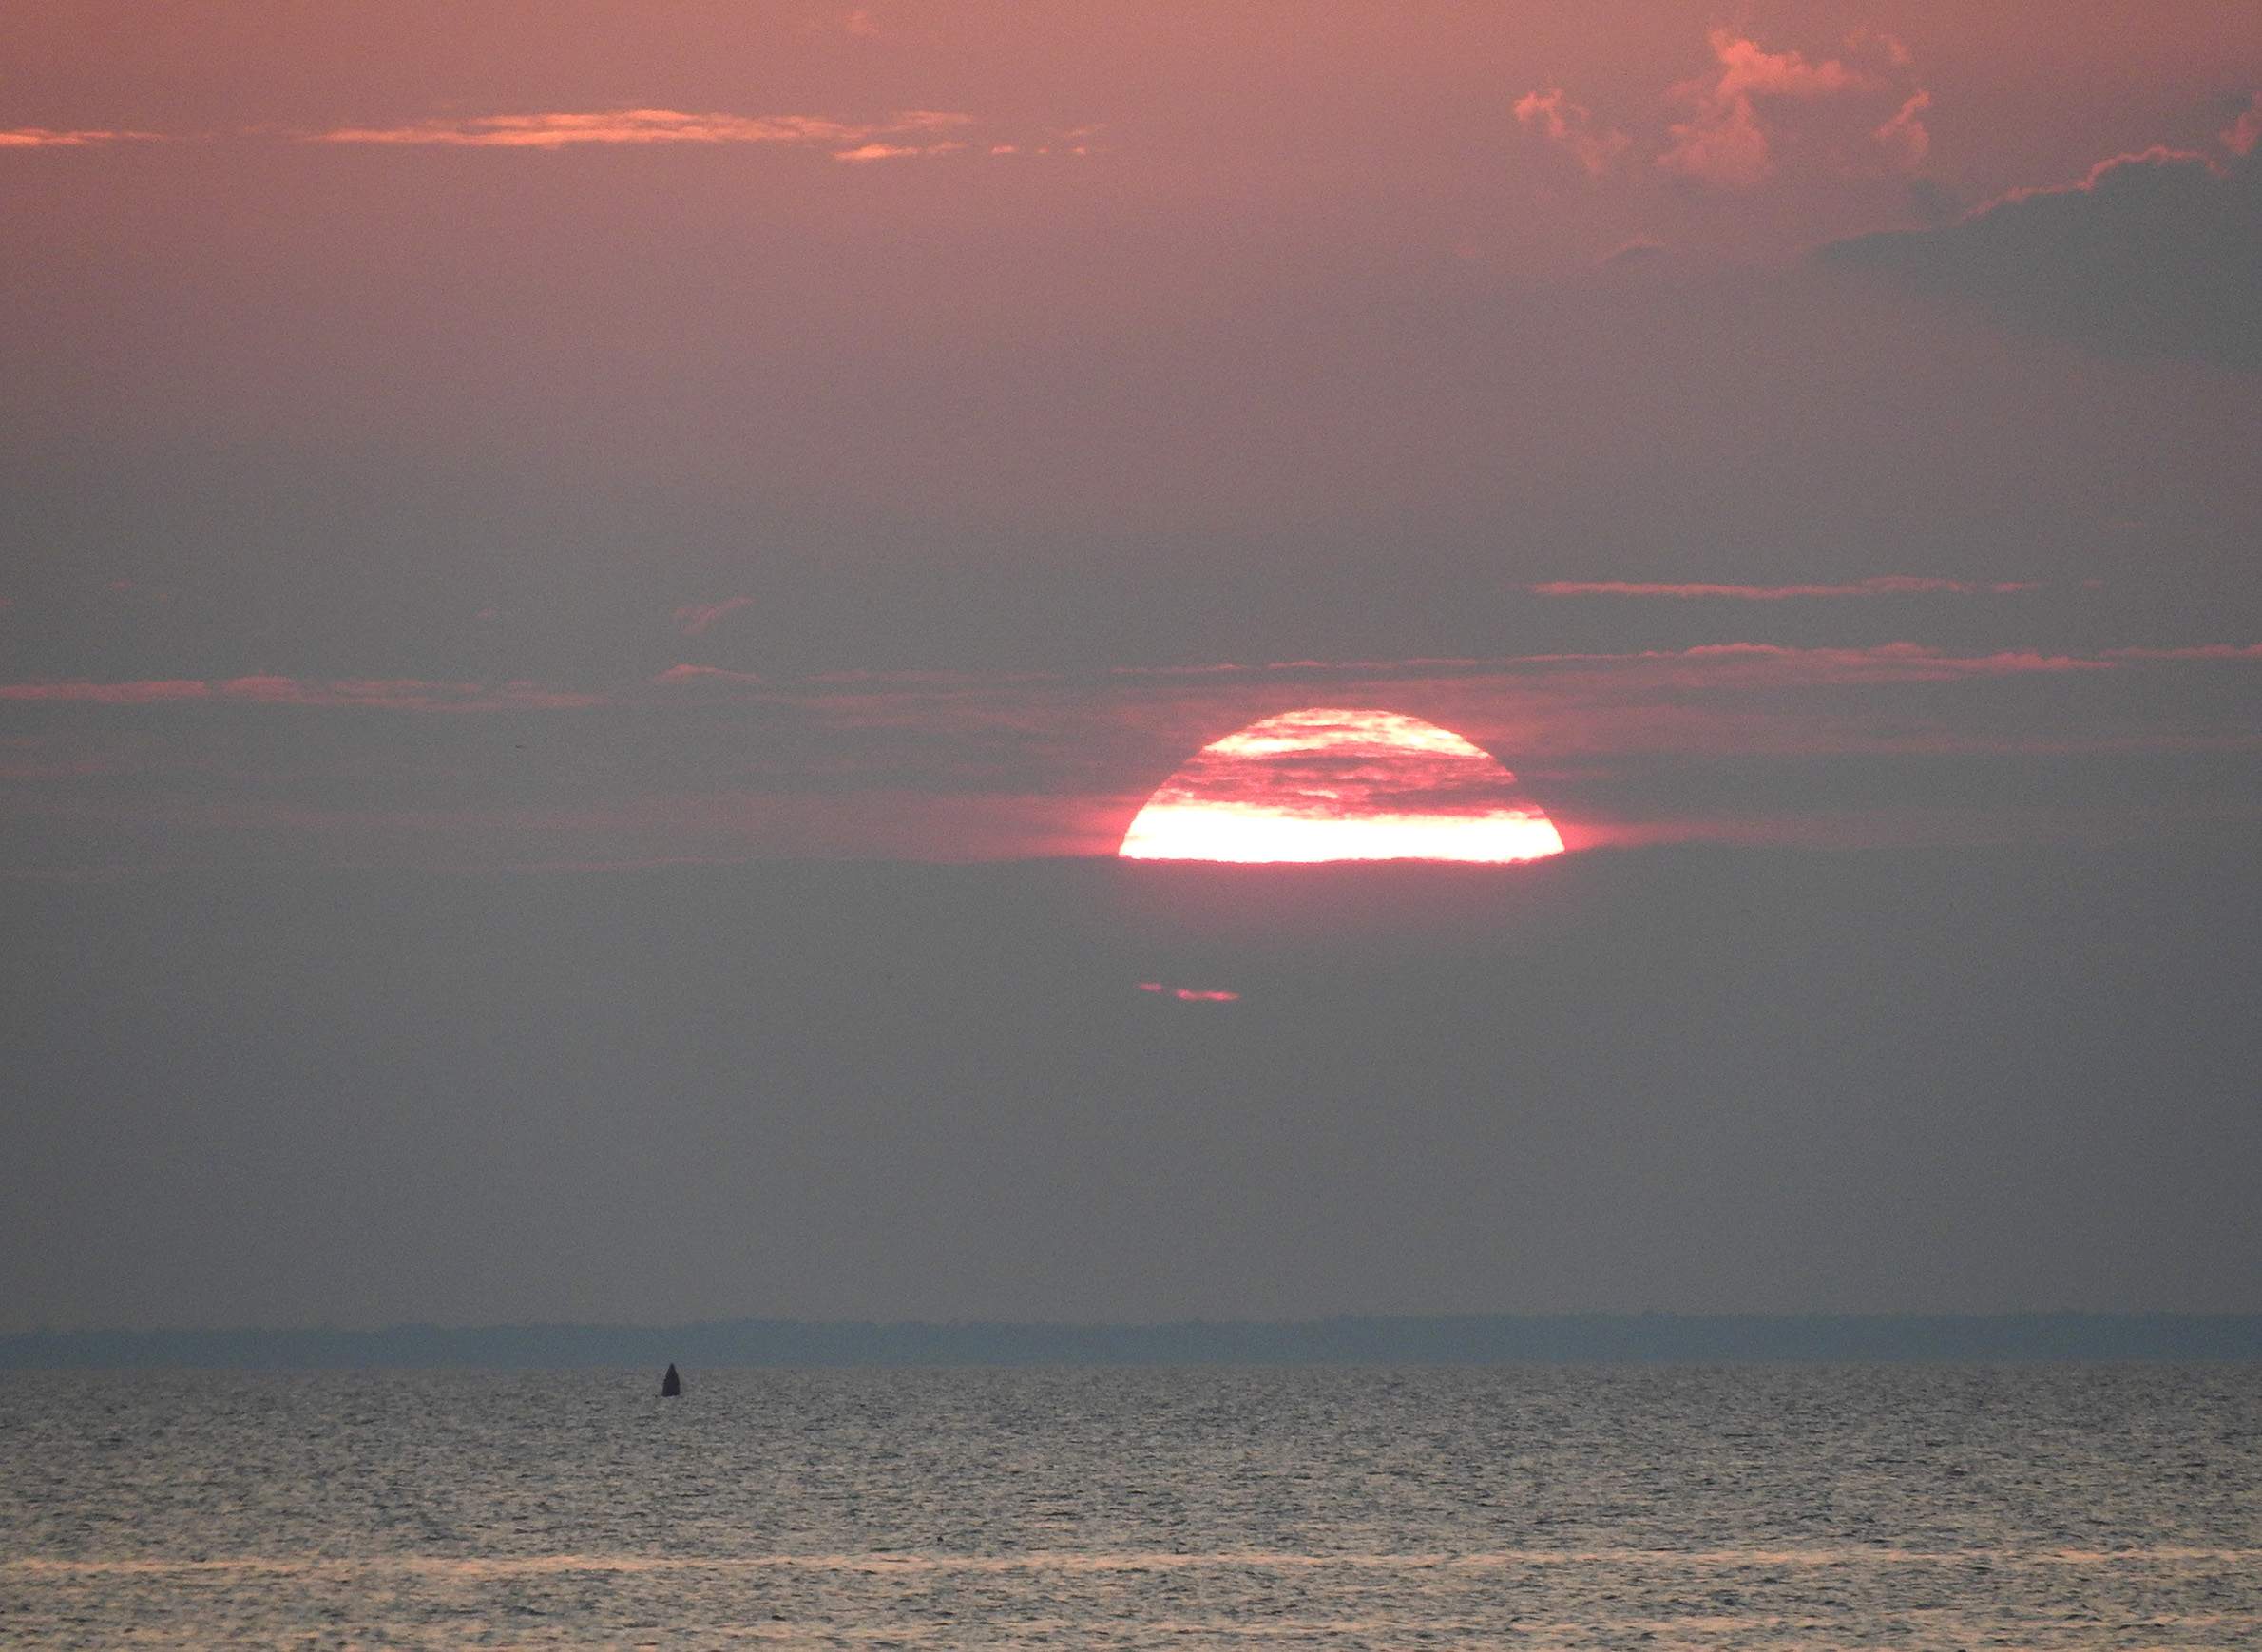 A summertime sun sets over the waters of Green Bay, as seen from Sunset Beach Park in Fish Creek in Door County. Photo by Brian Plunkett (CC BY 2.0) https://creativecommons.org/licenses/by/2.0/